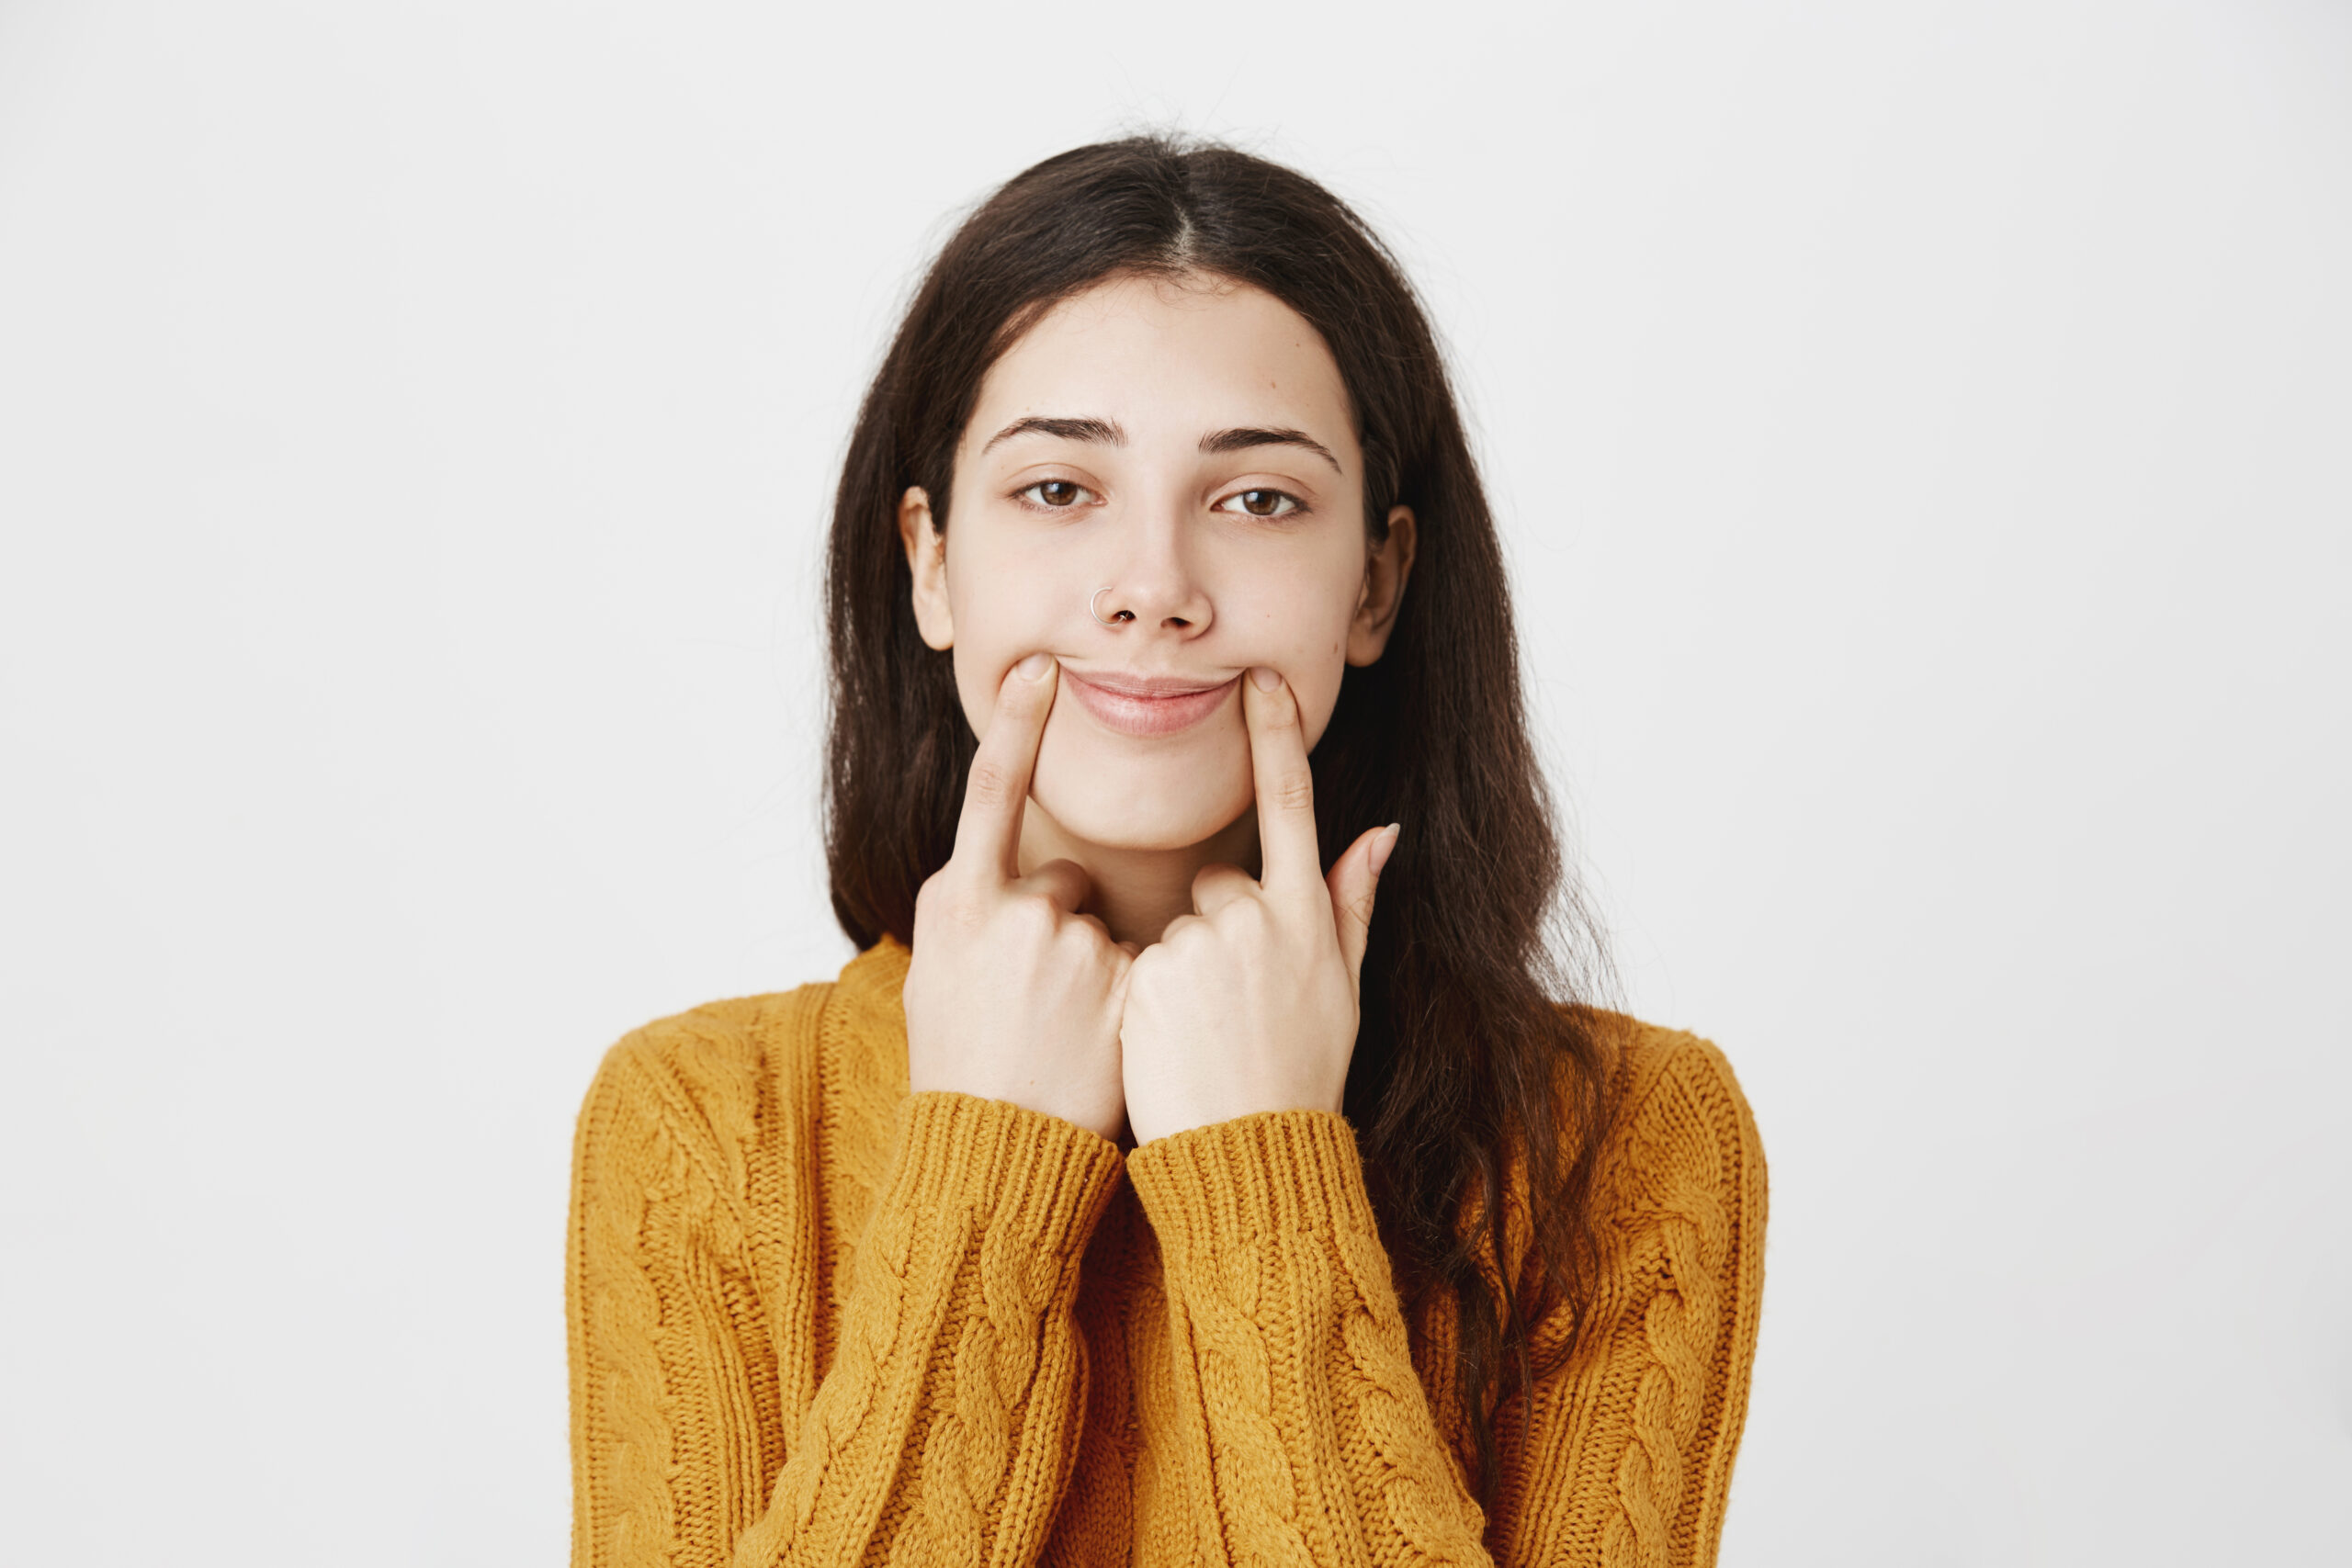 Close-up portrait of tired and gloomy caucasian pierced girl stretching mouth with fingers, making fake smile while feeling sad, standing over gray background. Woman is not in good mood.